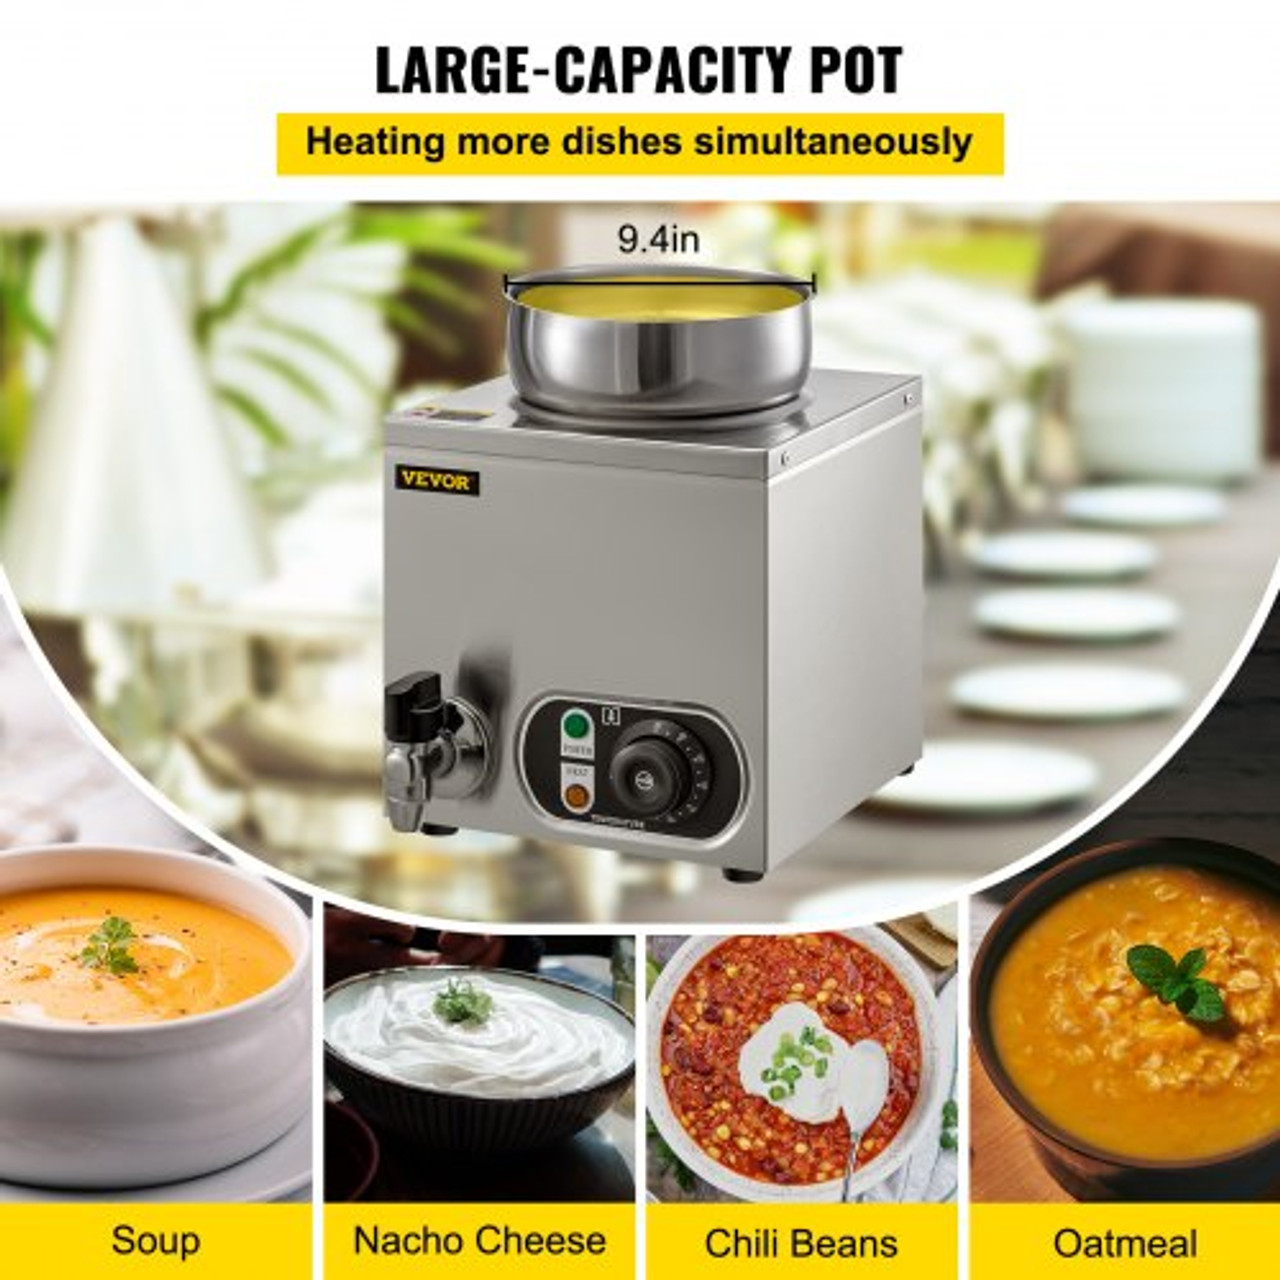 110V Commercial Soup Warmer 7.4 Qt Capacity, 300W Electric Food Warmer Adjustable Temp.86-185?, Stainless Steel Countertop Soup Pot with Tap, Bain Marie Food Warmer for Cheese/Hot Dog/Rice